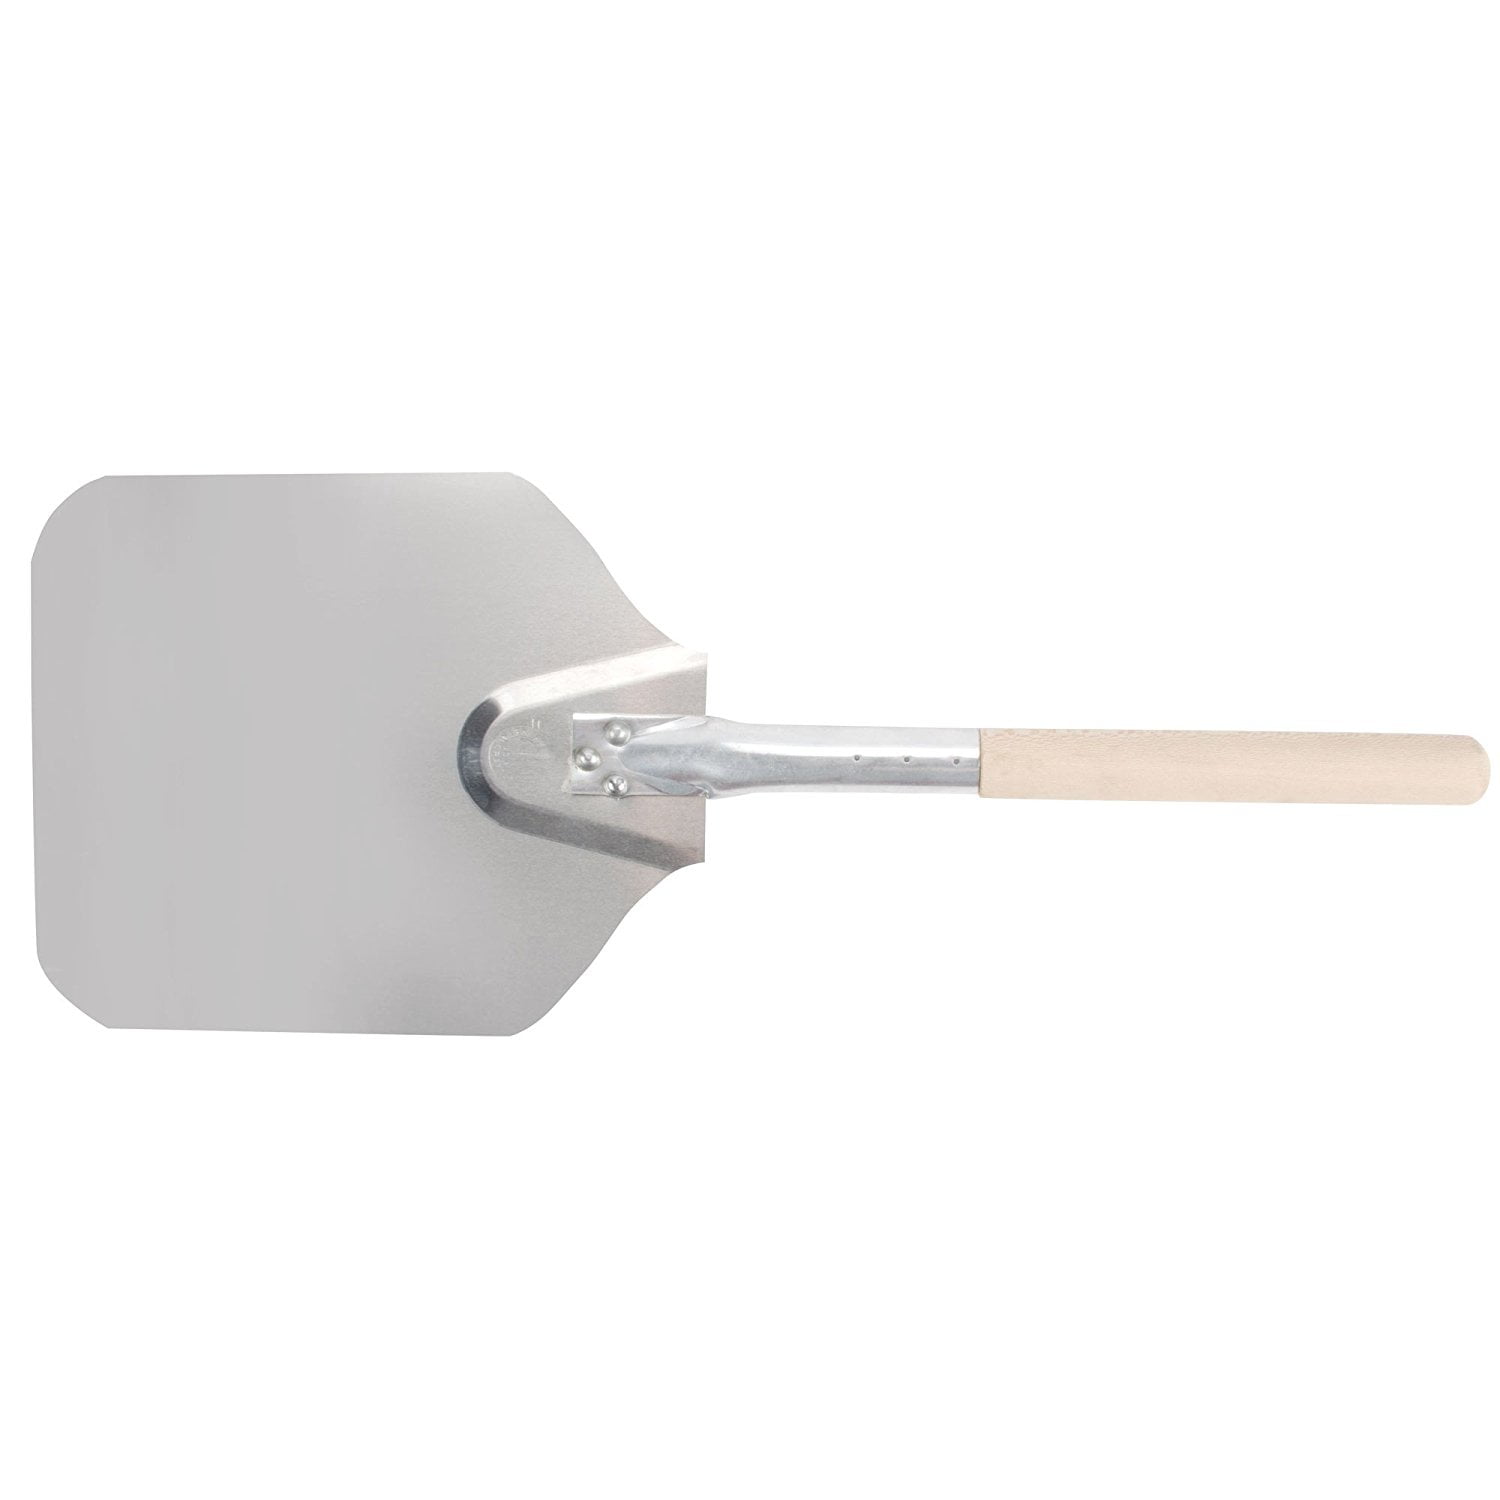 XDJ Pizza Peel 9 Round Pizza Metal Spatula Perforated Aluminum Pizza Baked Shovel With High Temperature Resistant Long And Short Handle For Baking Homemade Pizzas Breads